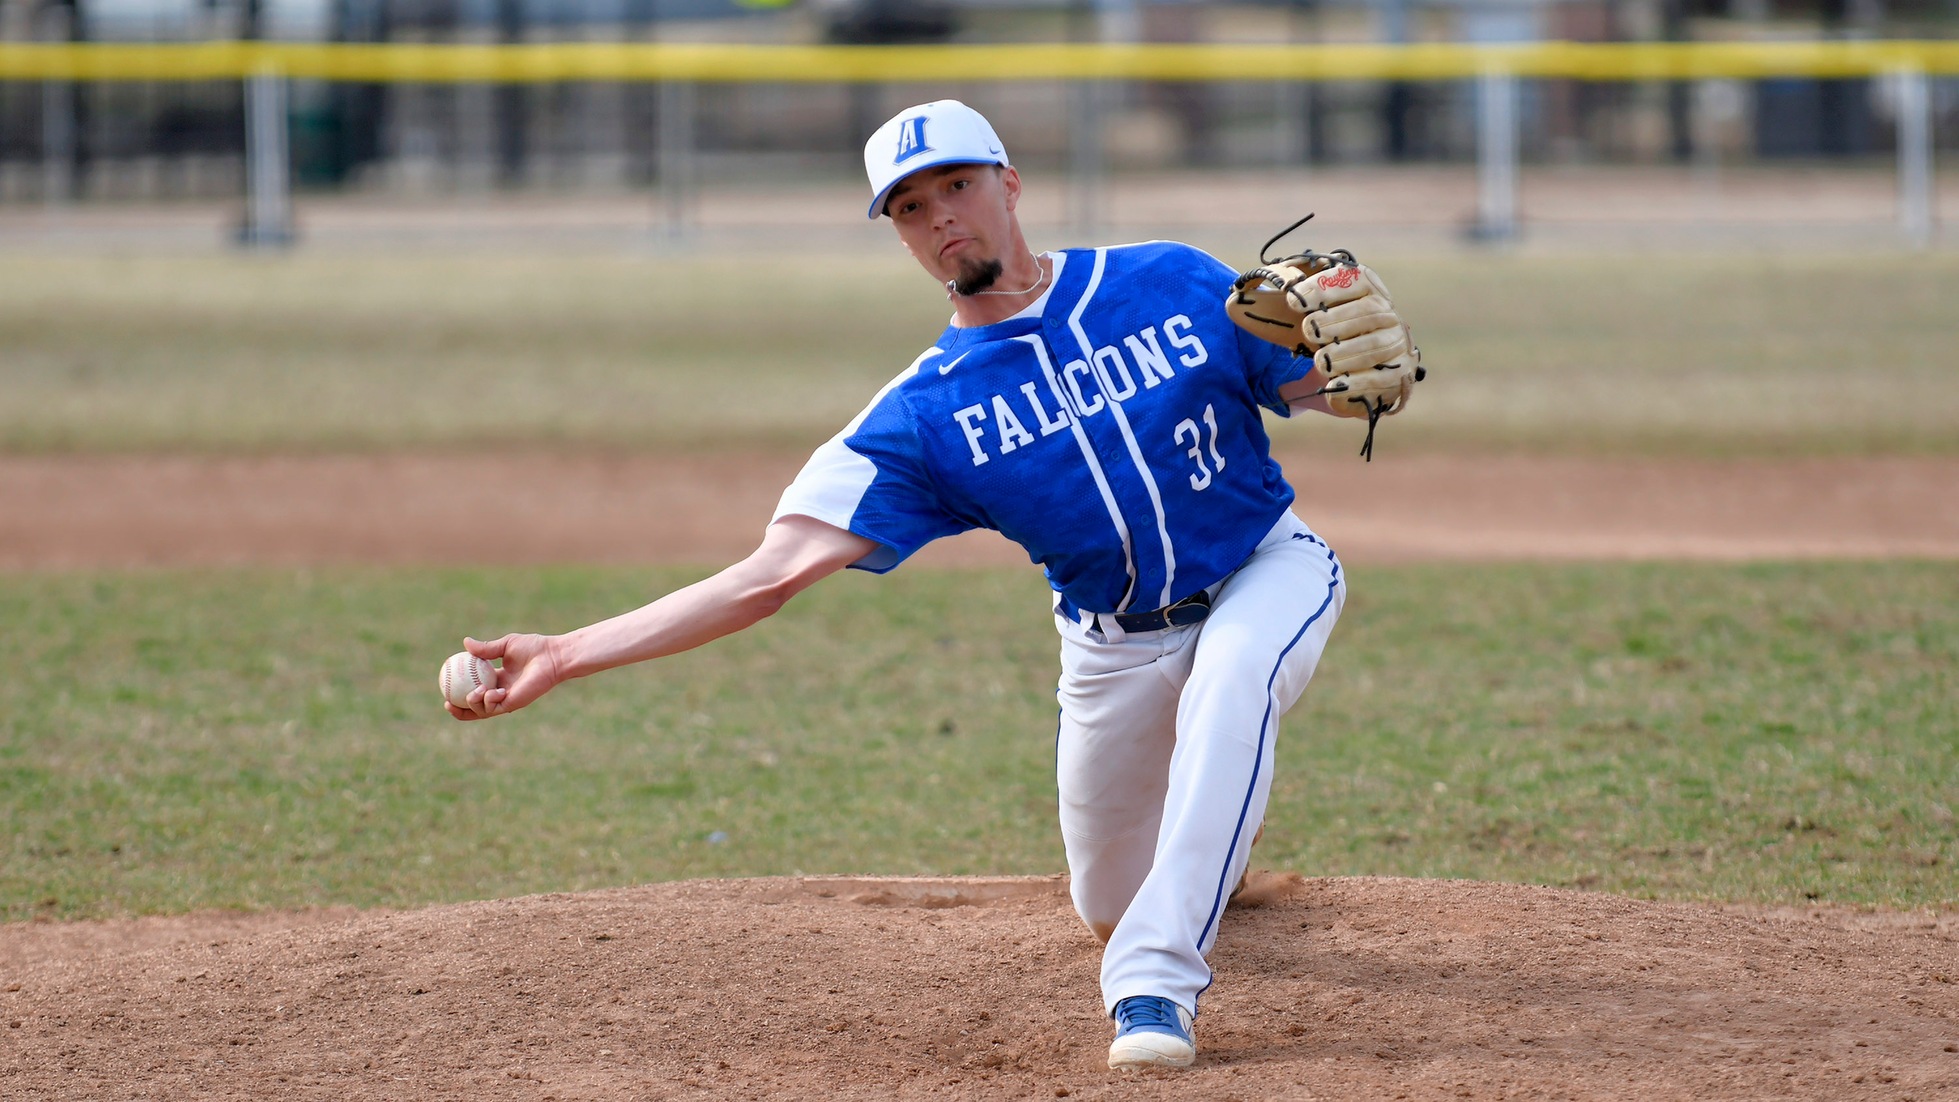 Falcons Swept by Saint Joseph's (ME) in Conference Doubleheader